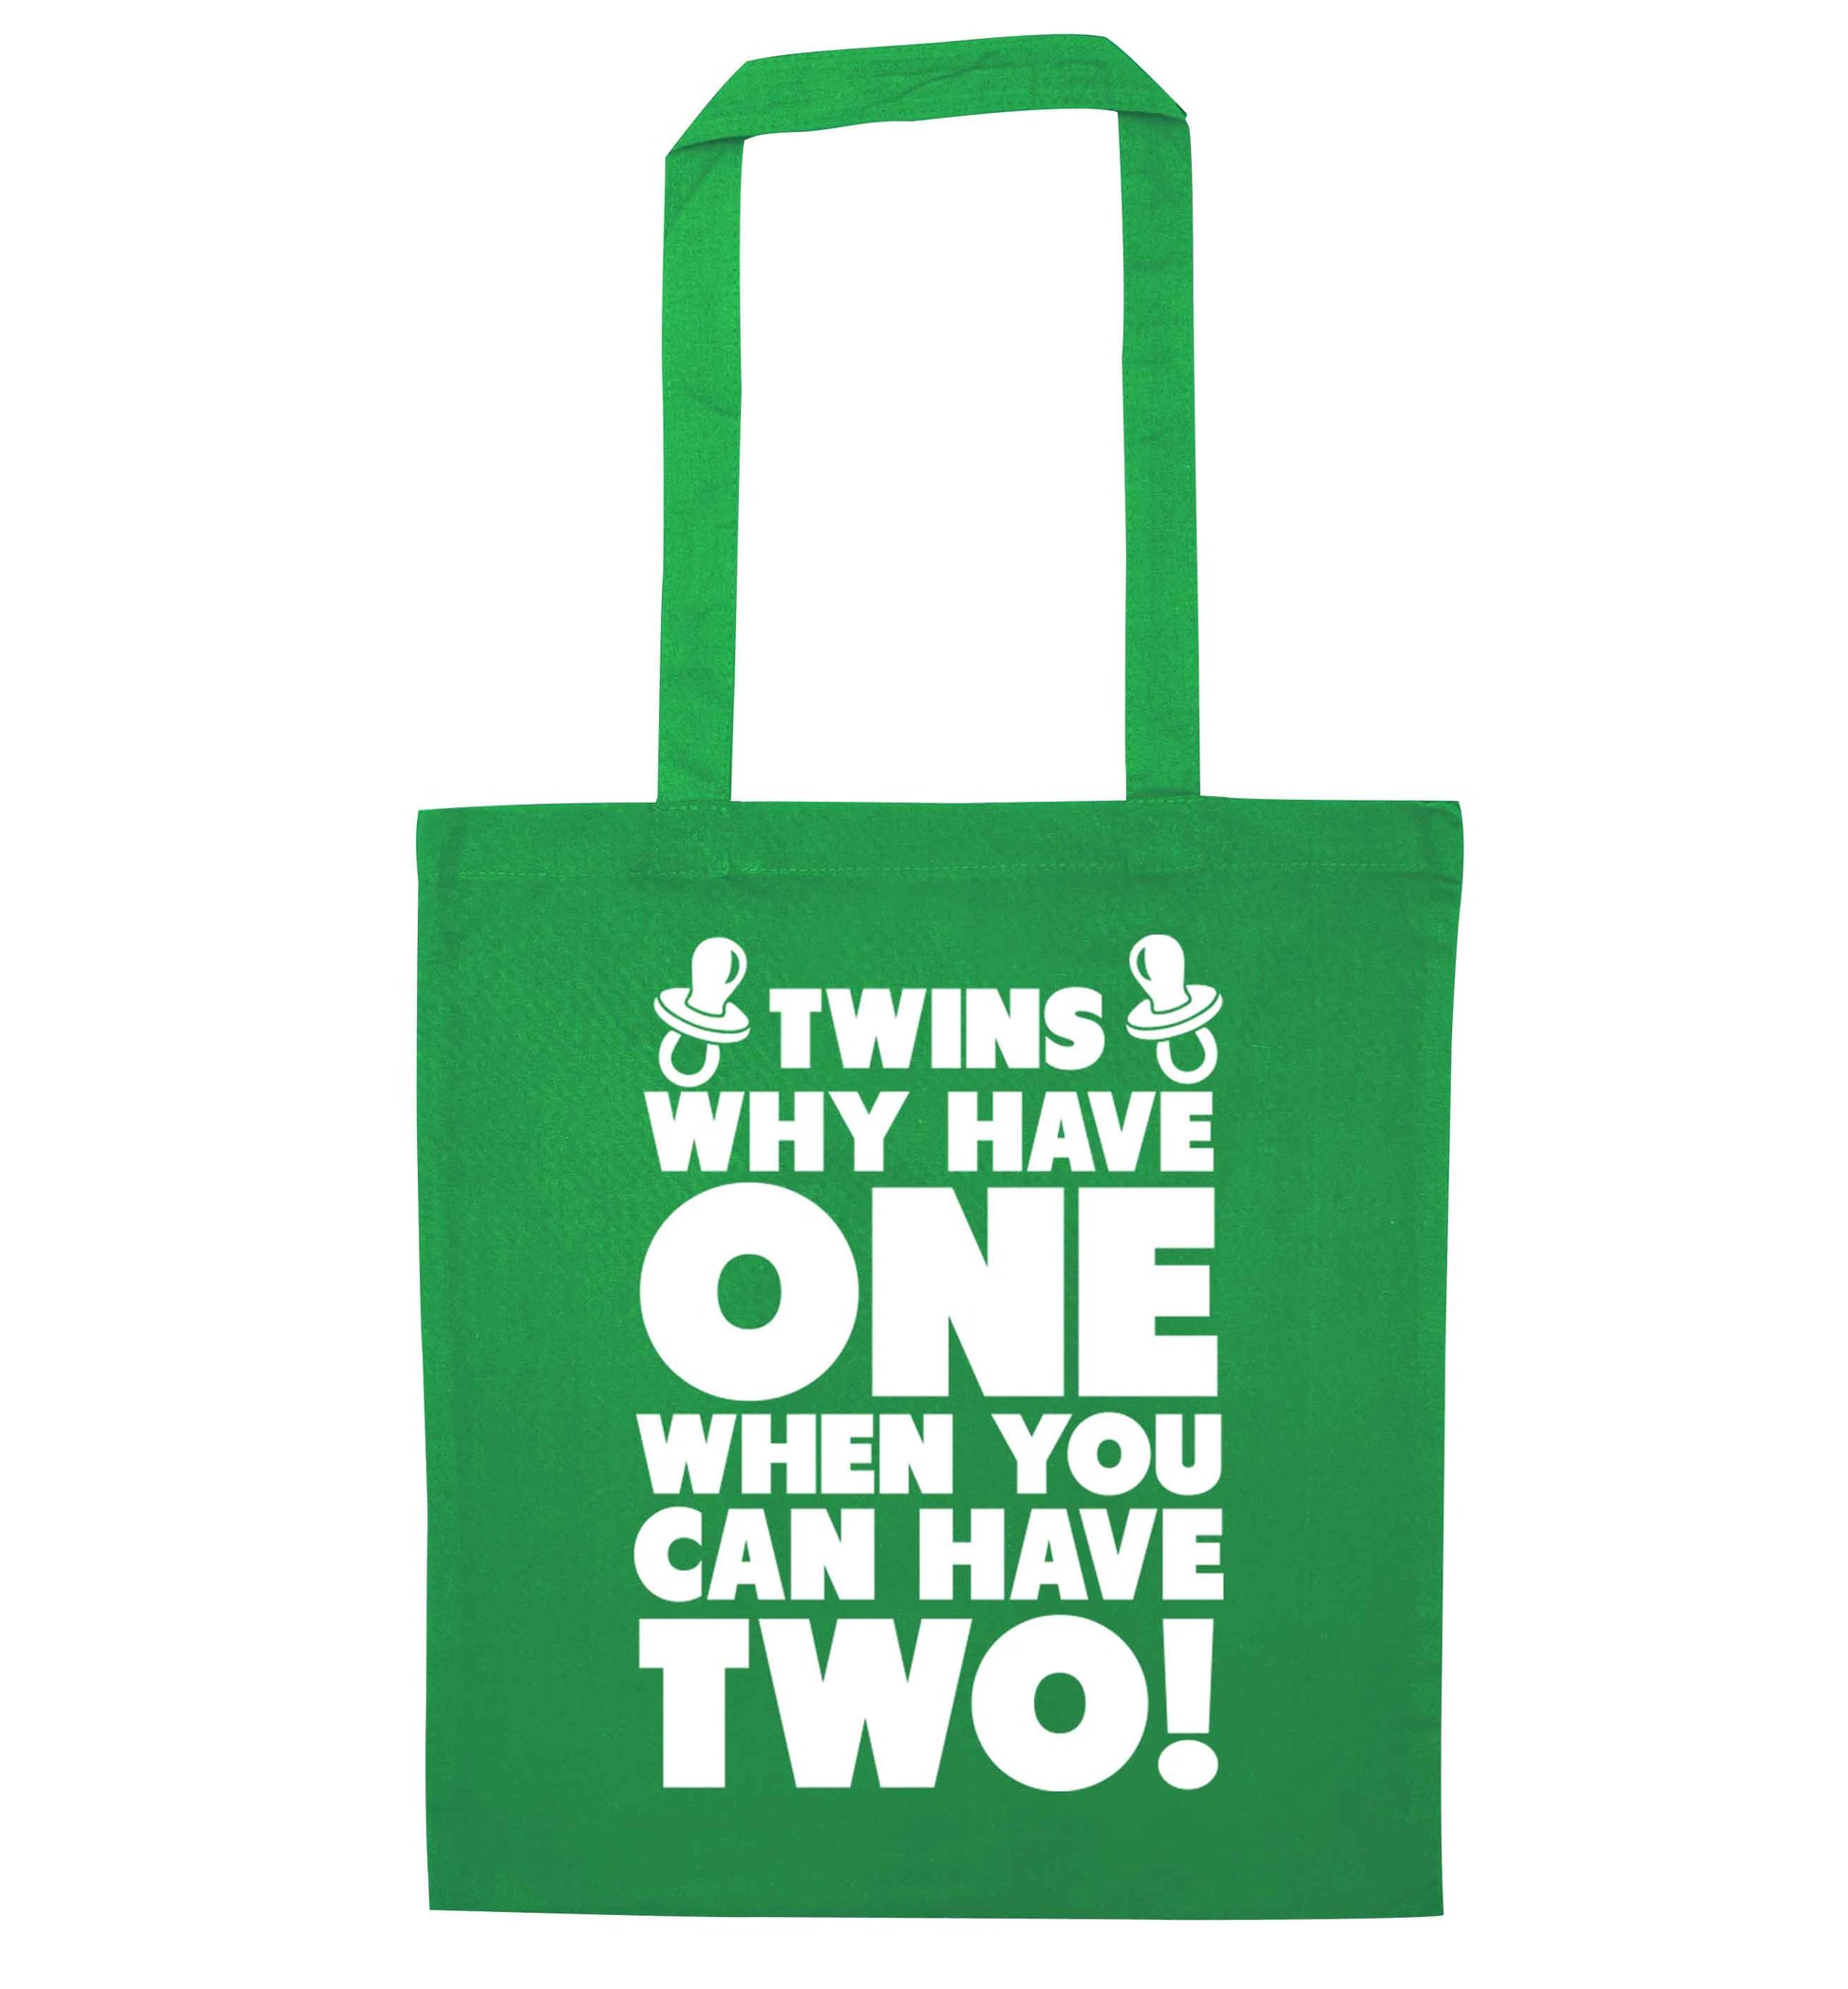 Twins why have one when you can have two green tote bag